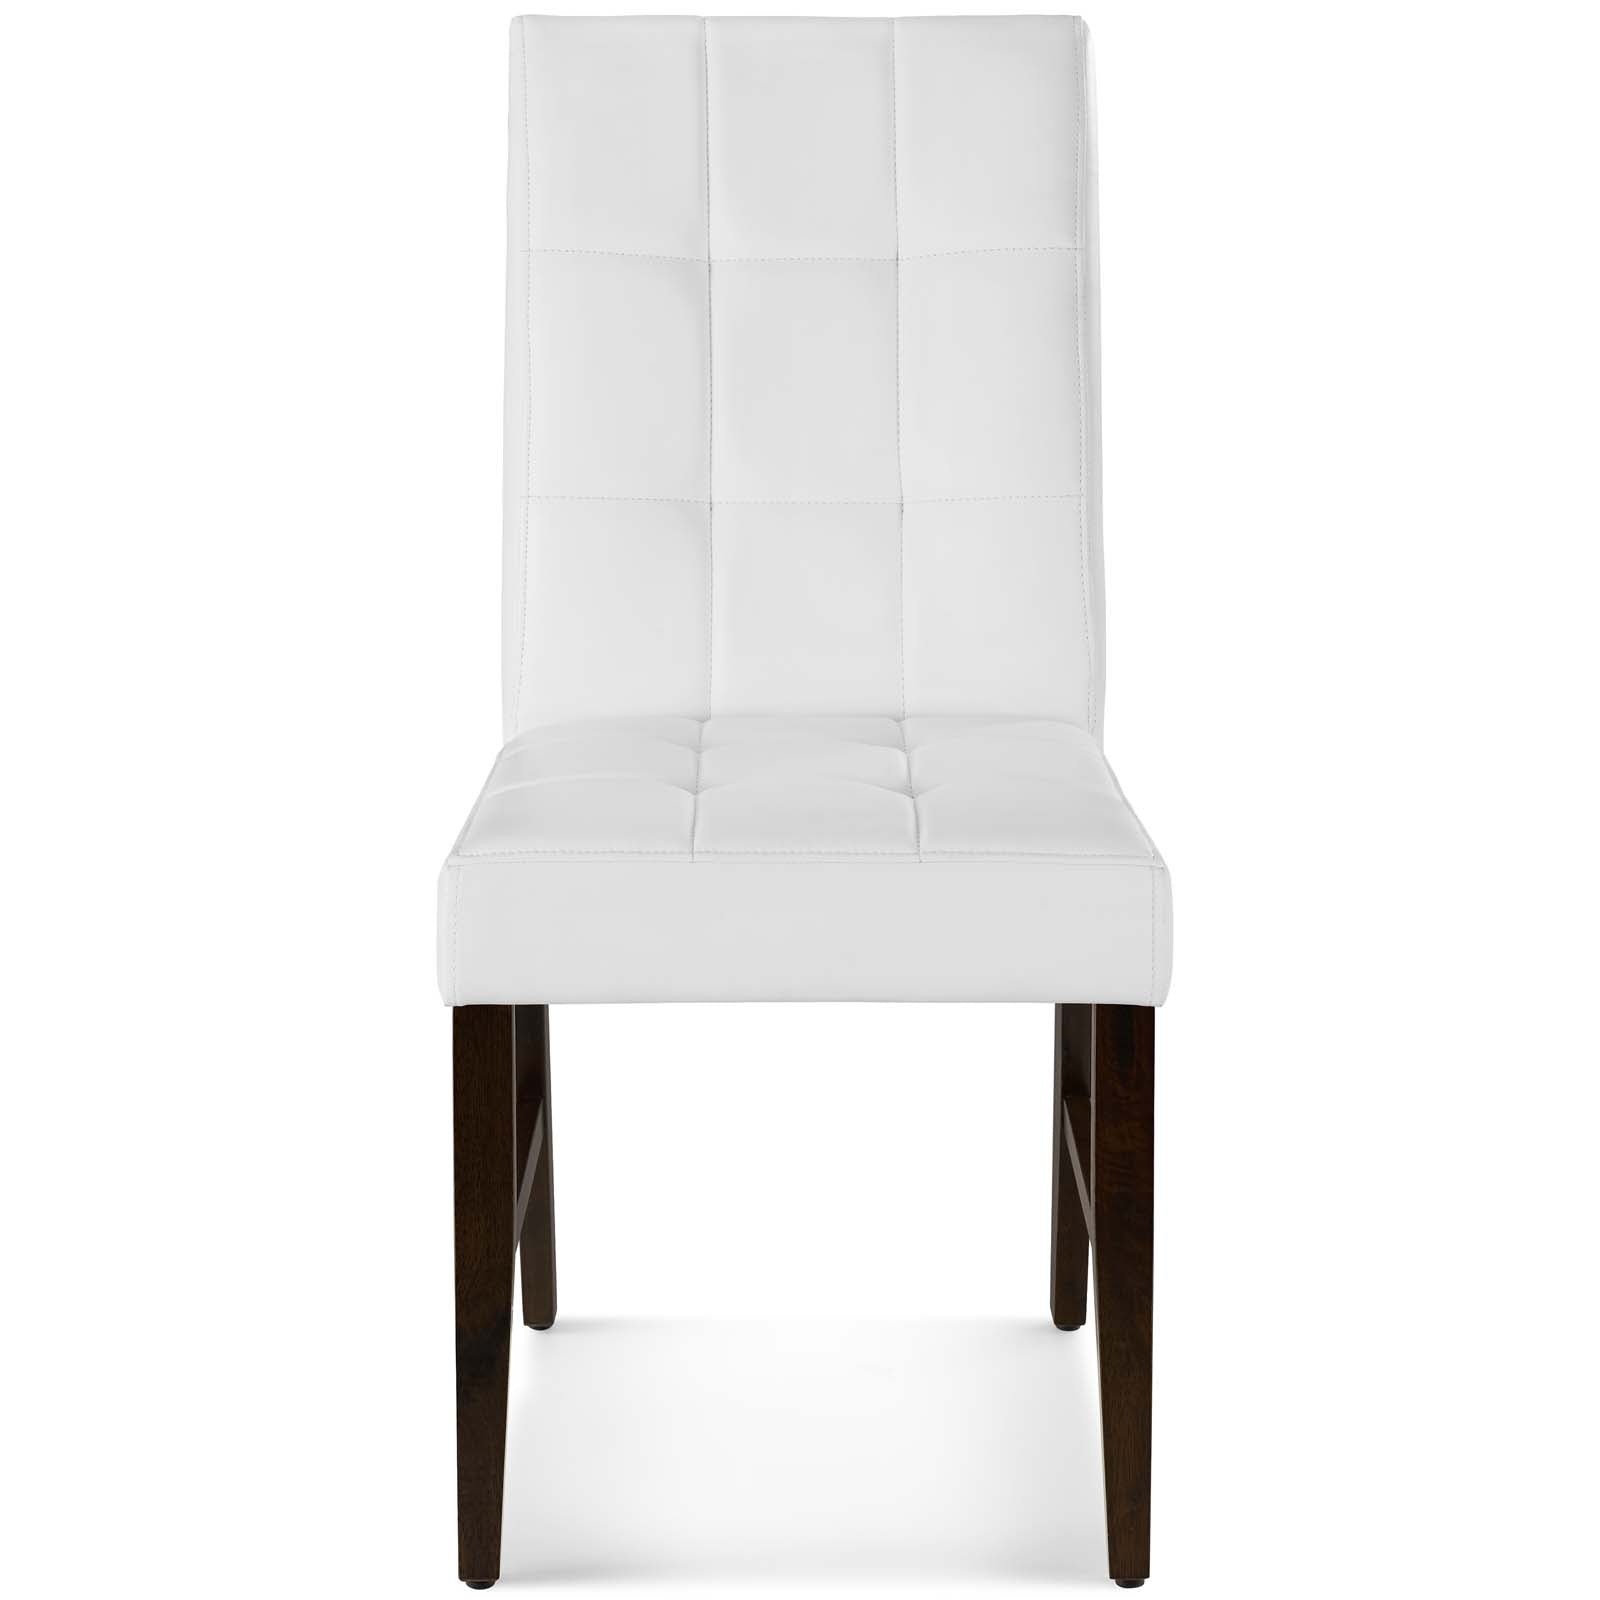 Modway Dining Chairs - Promulgate Biscuit Tufted Upholstered Faux Leather Dining Side Chair Set of 2 White